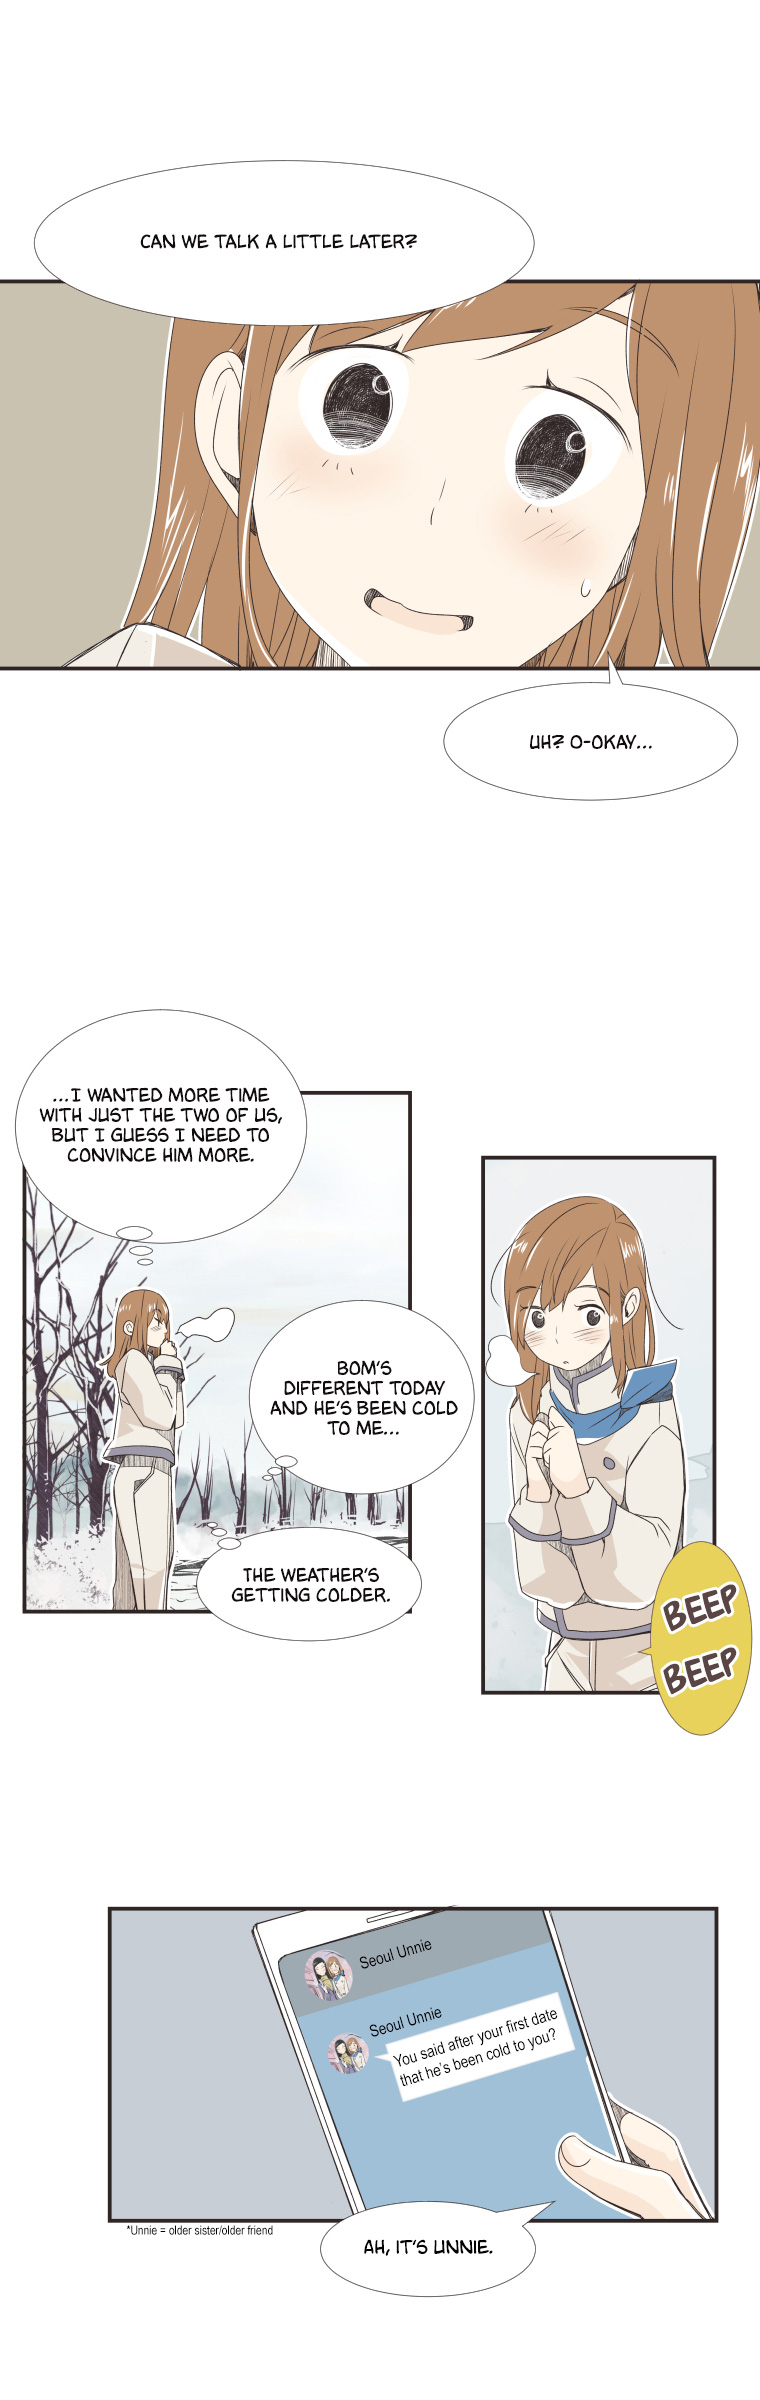 When Winter Comes To The Way Station - Page 2